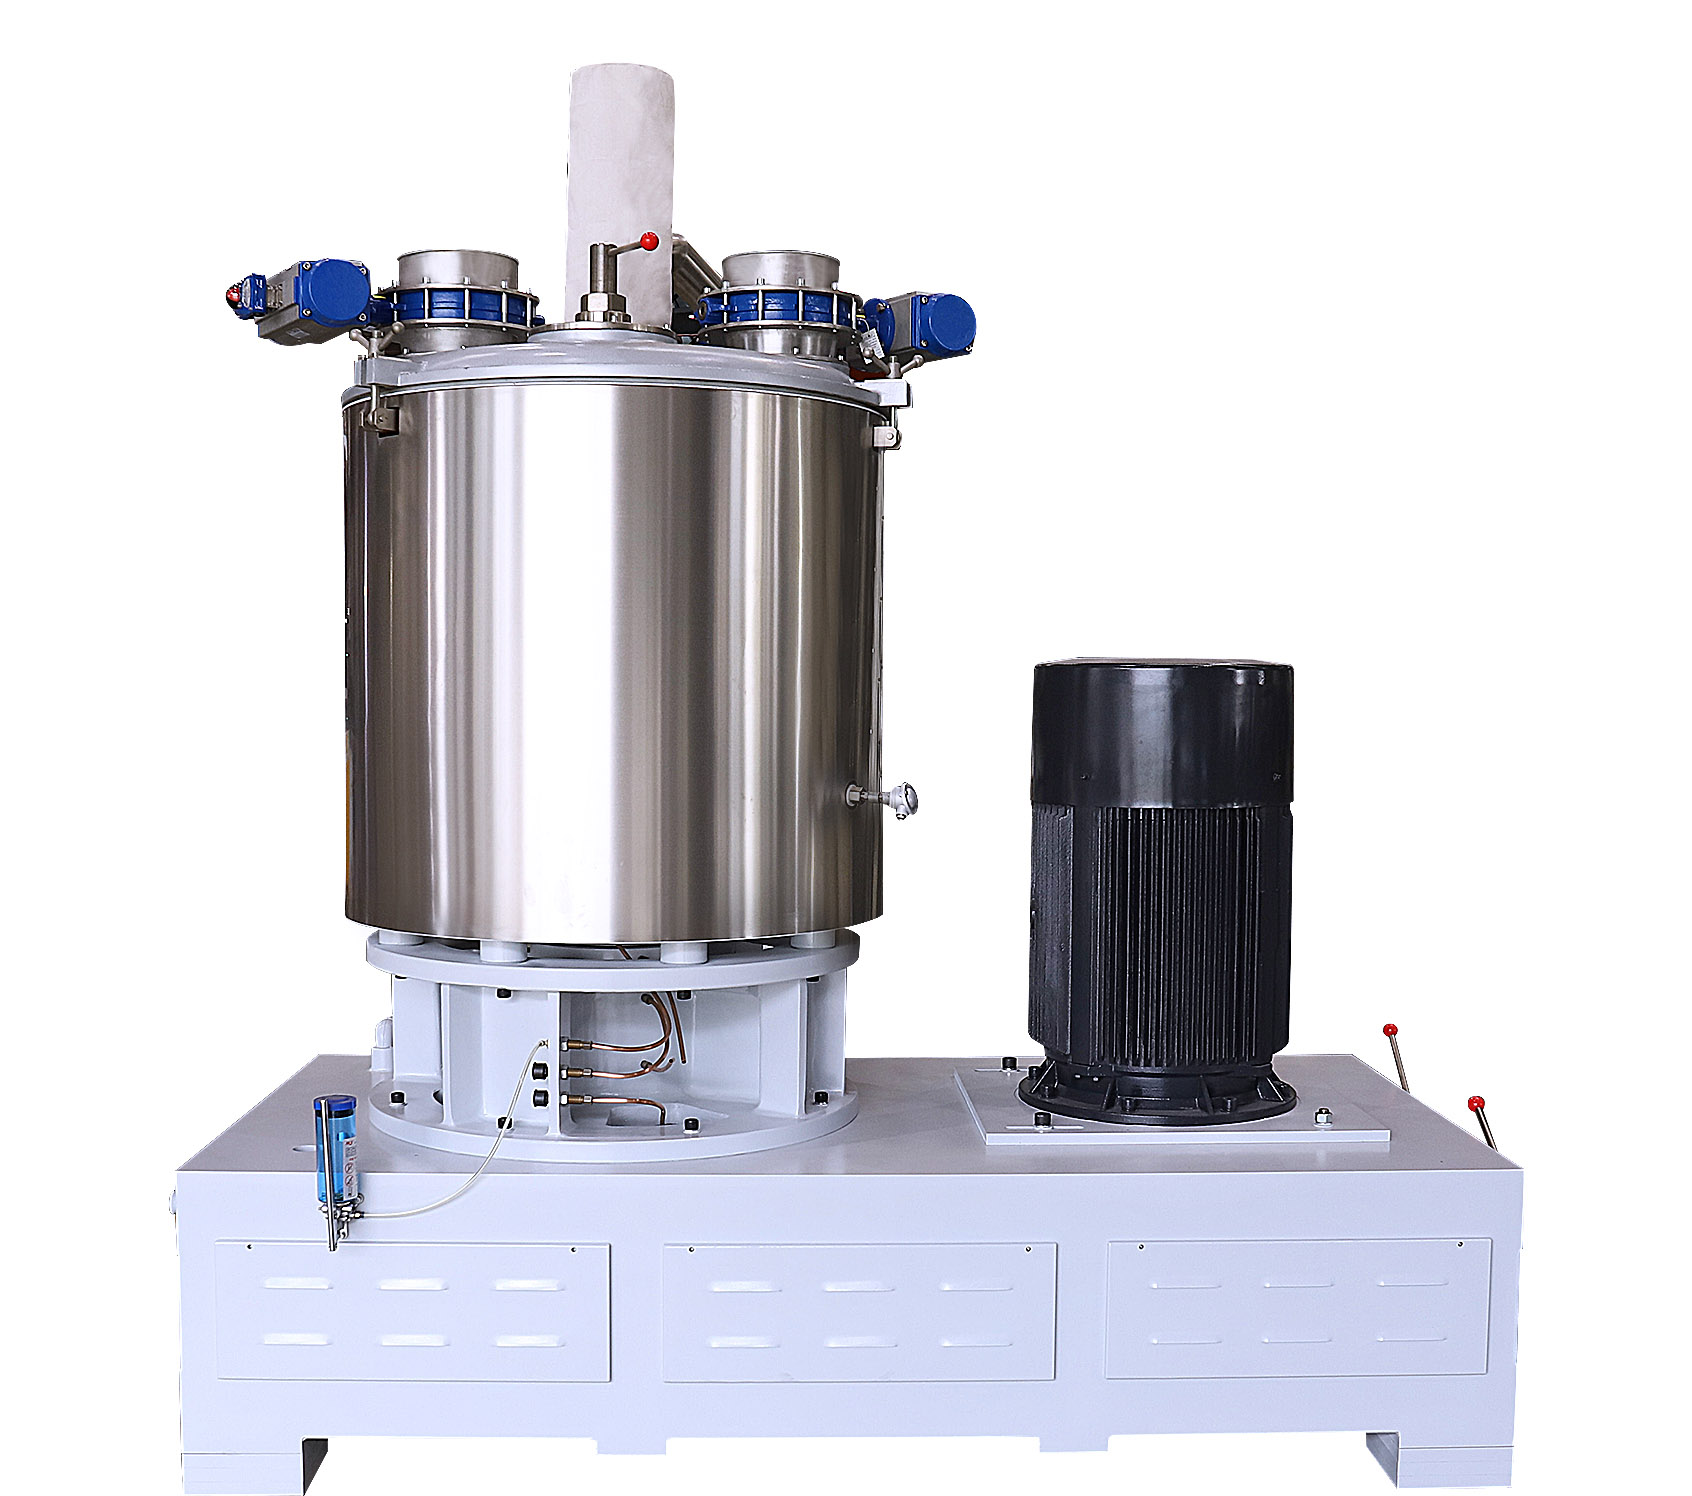 The application of Liansu high-speed mixer in multiple industries